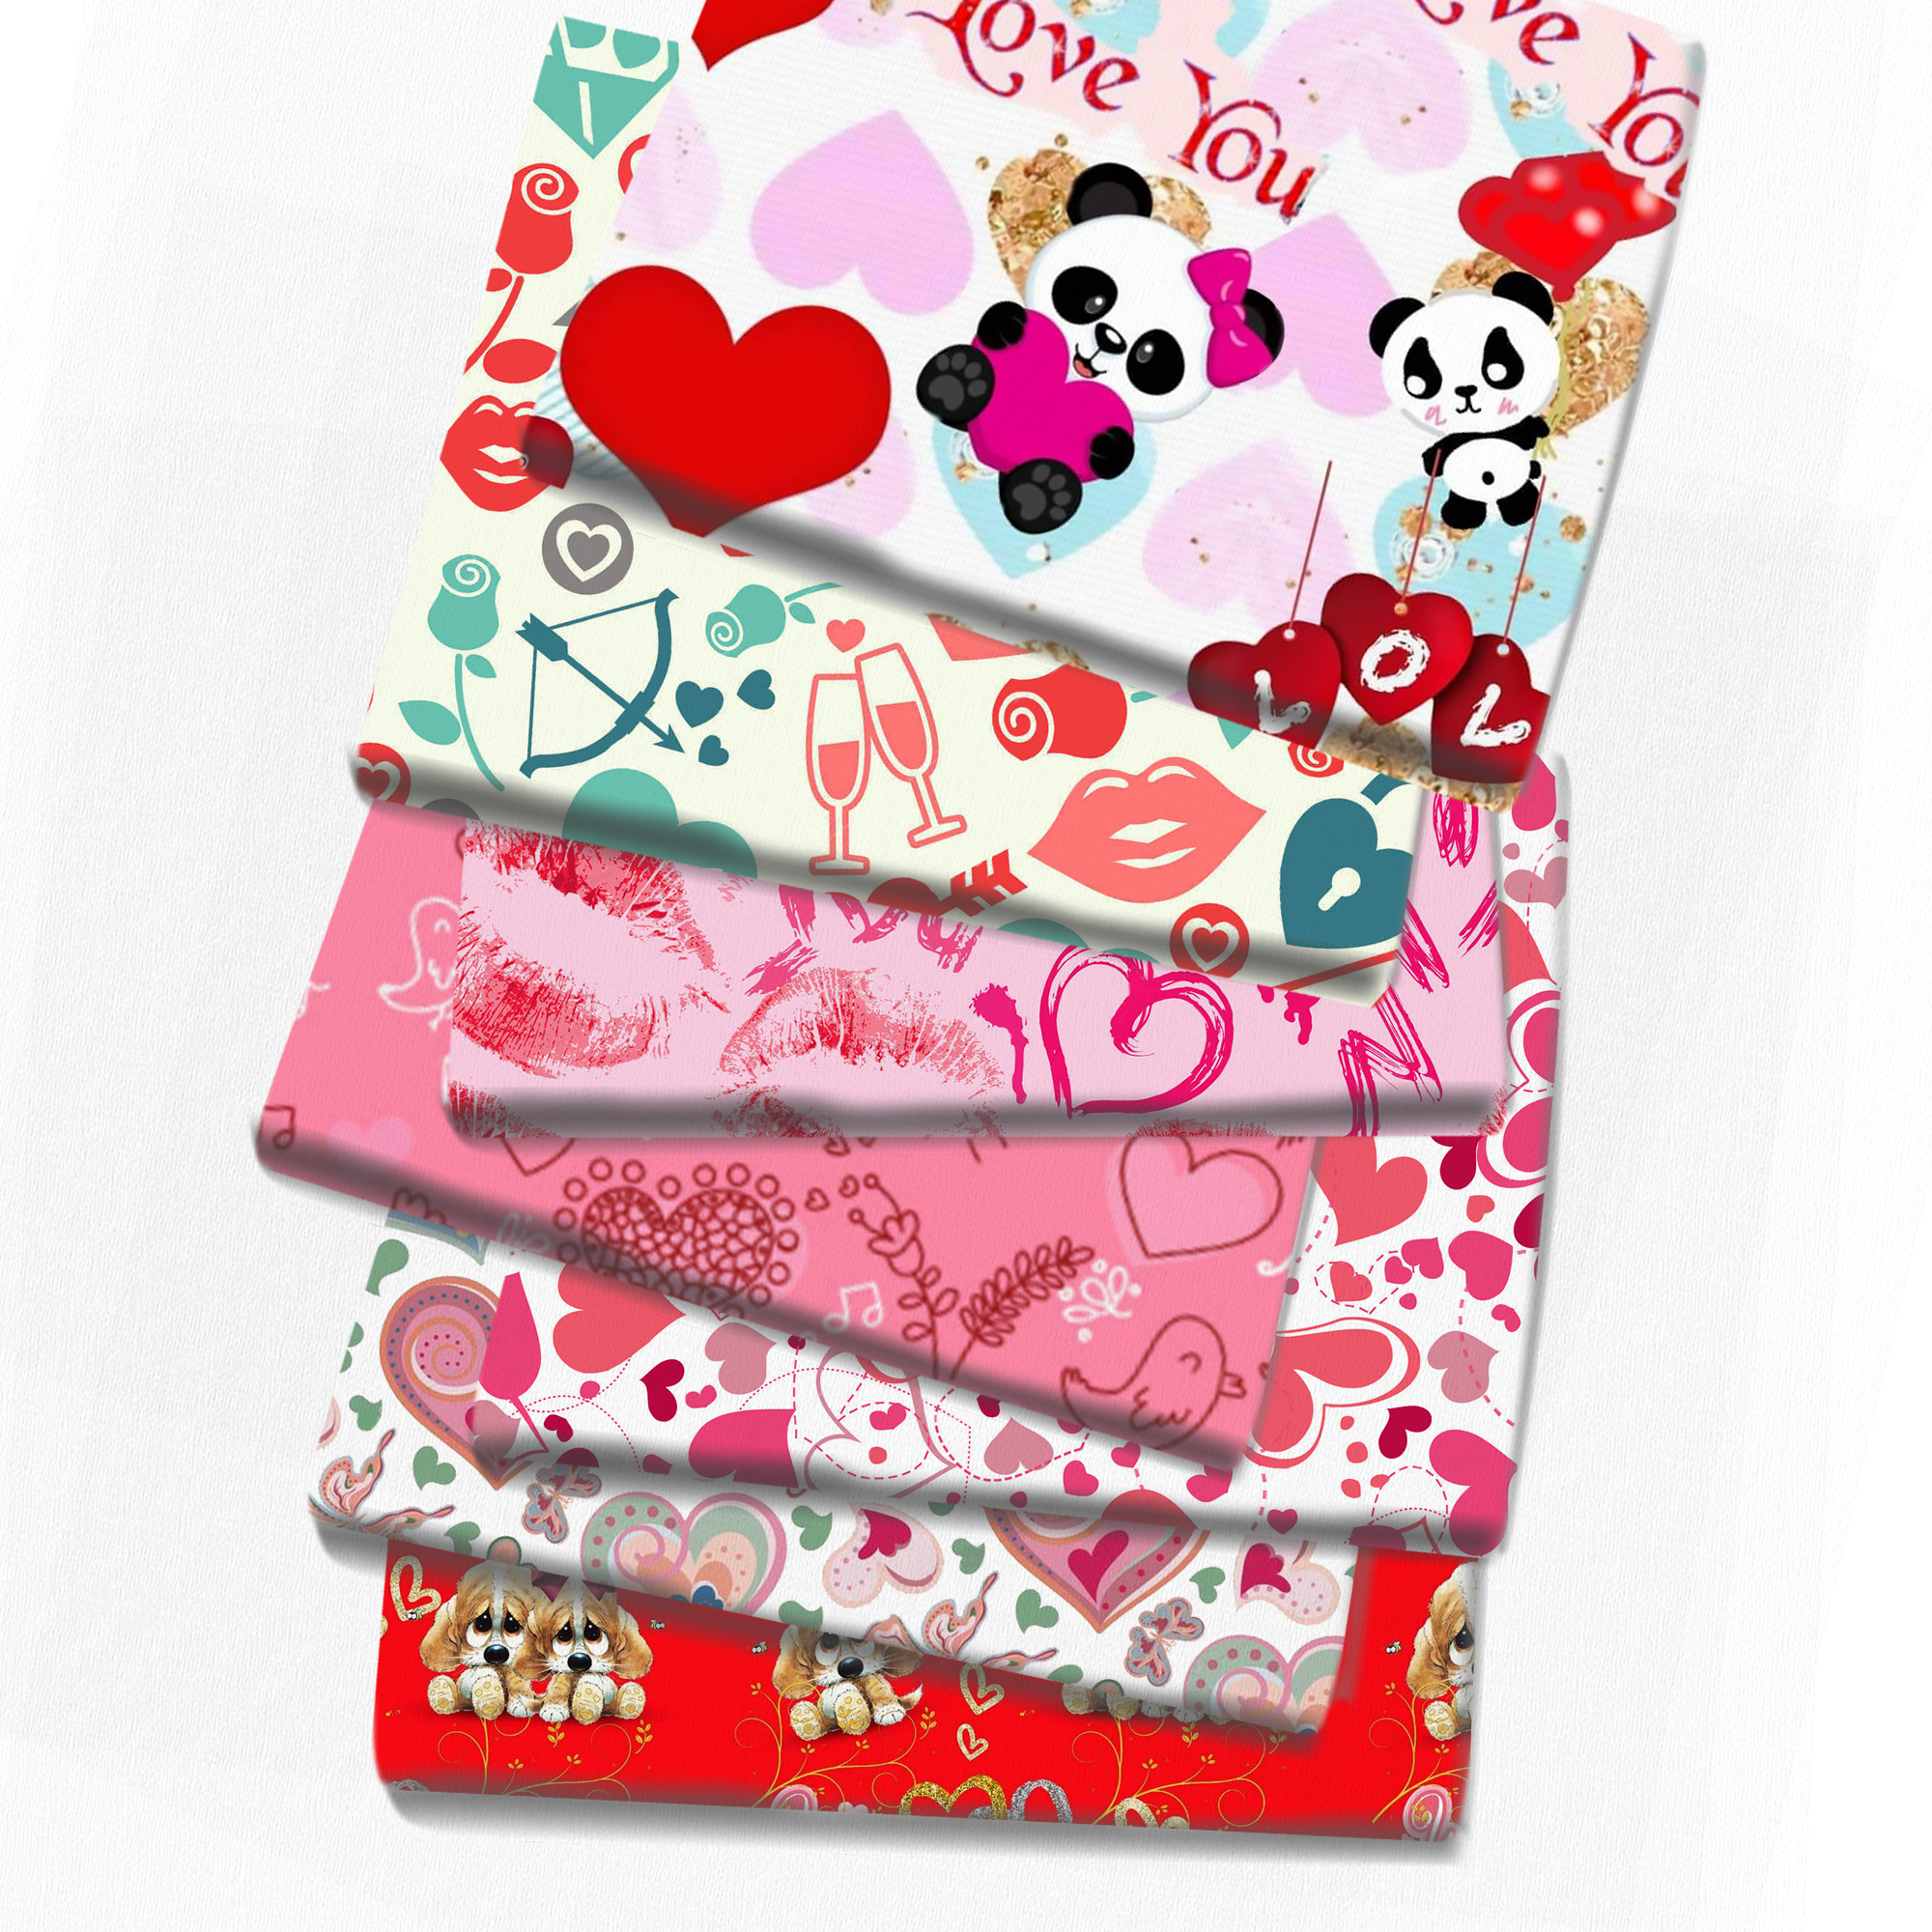 Patchwork Heart Printed Cotton Lycra Fabric for Tissue Sewing Quilting Fabrics Needlework Material DIY Handmade,c14894